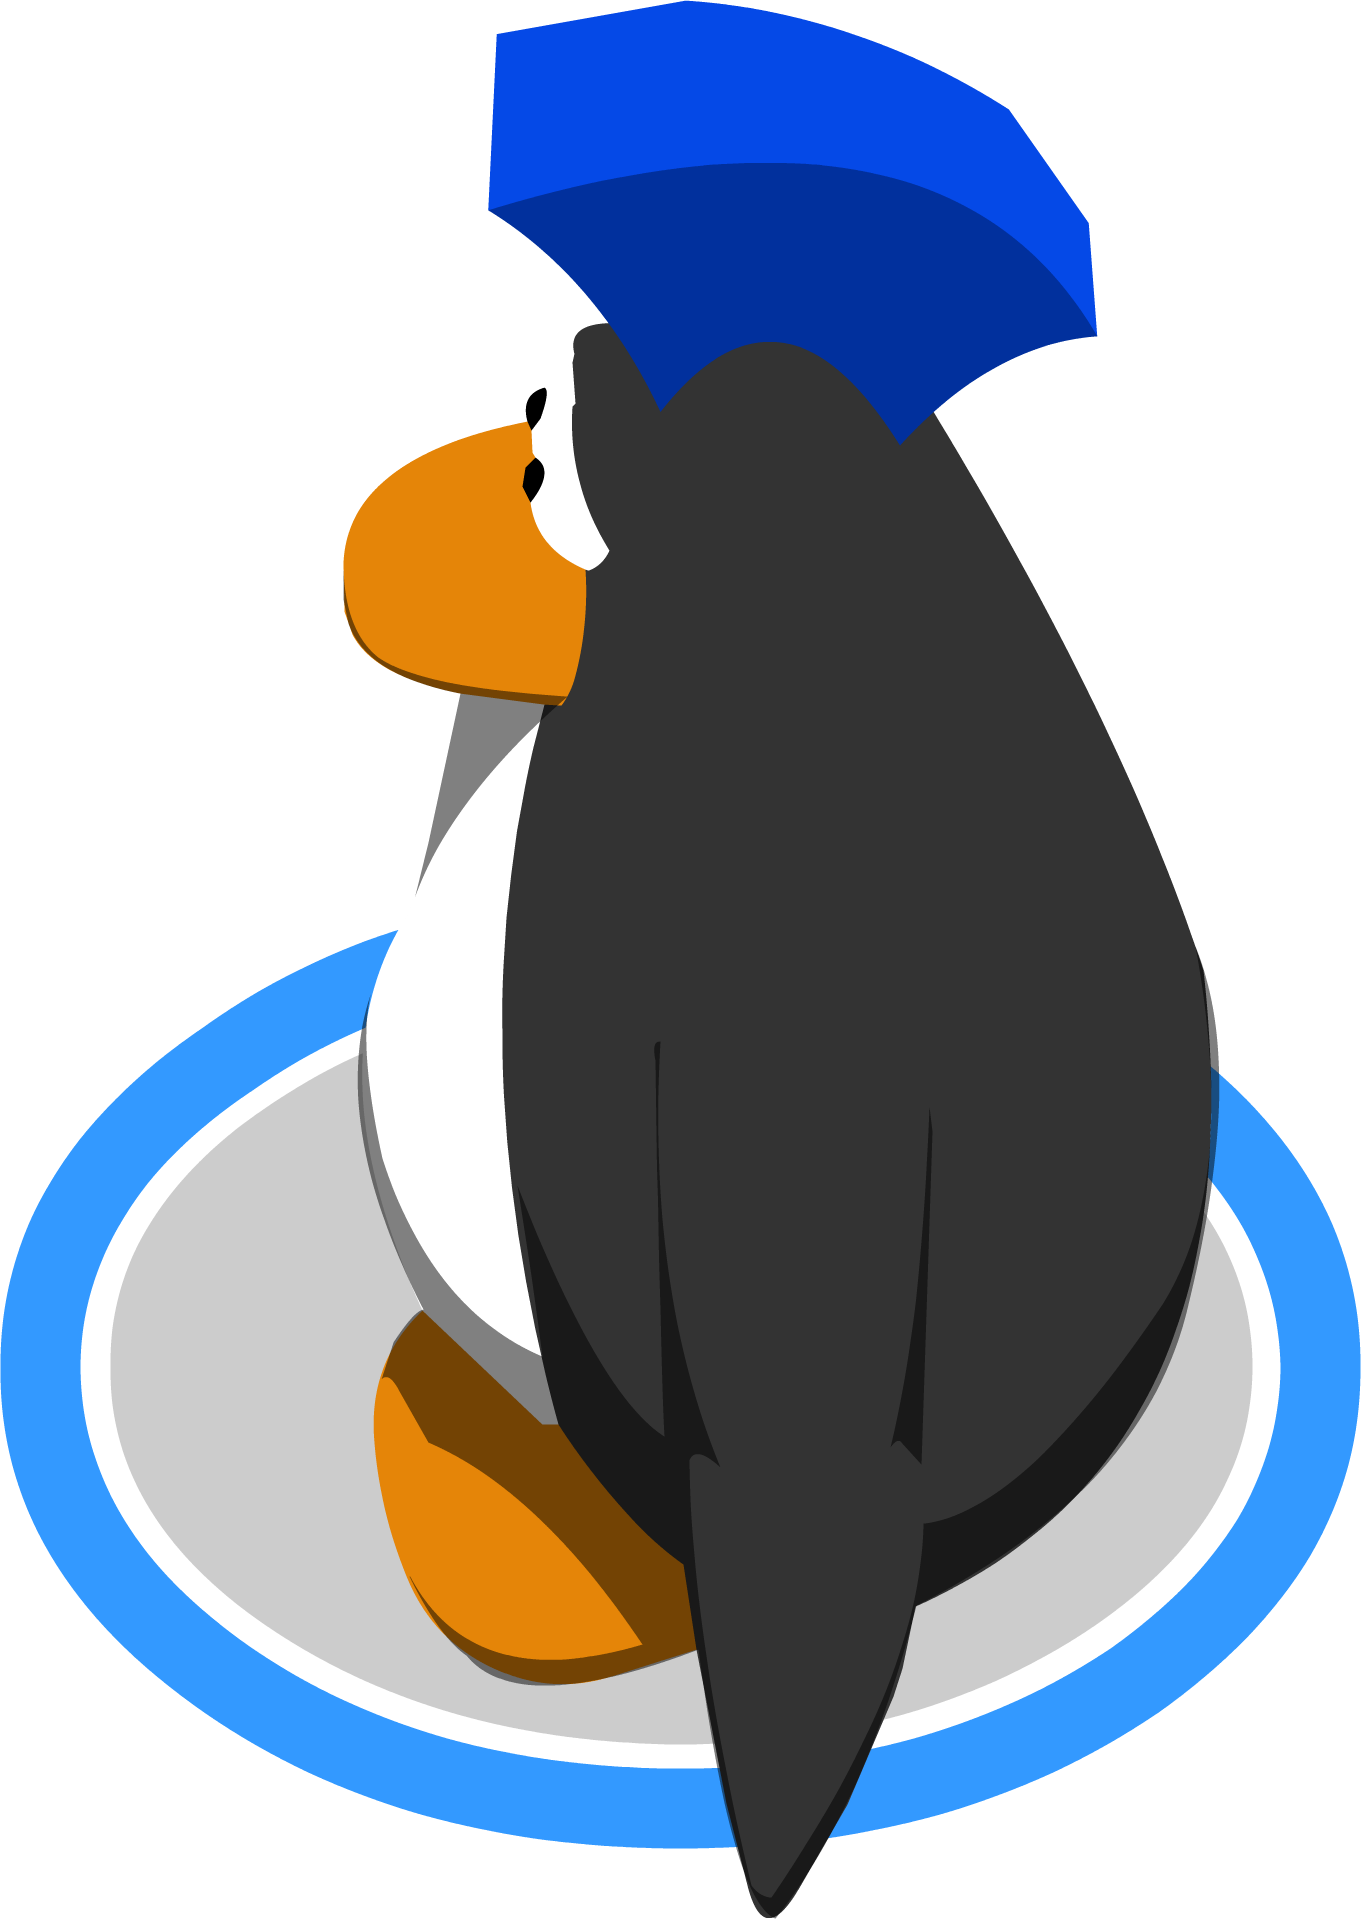 Image the spikester in. Clipart penquin side view